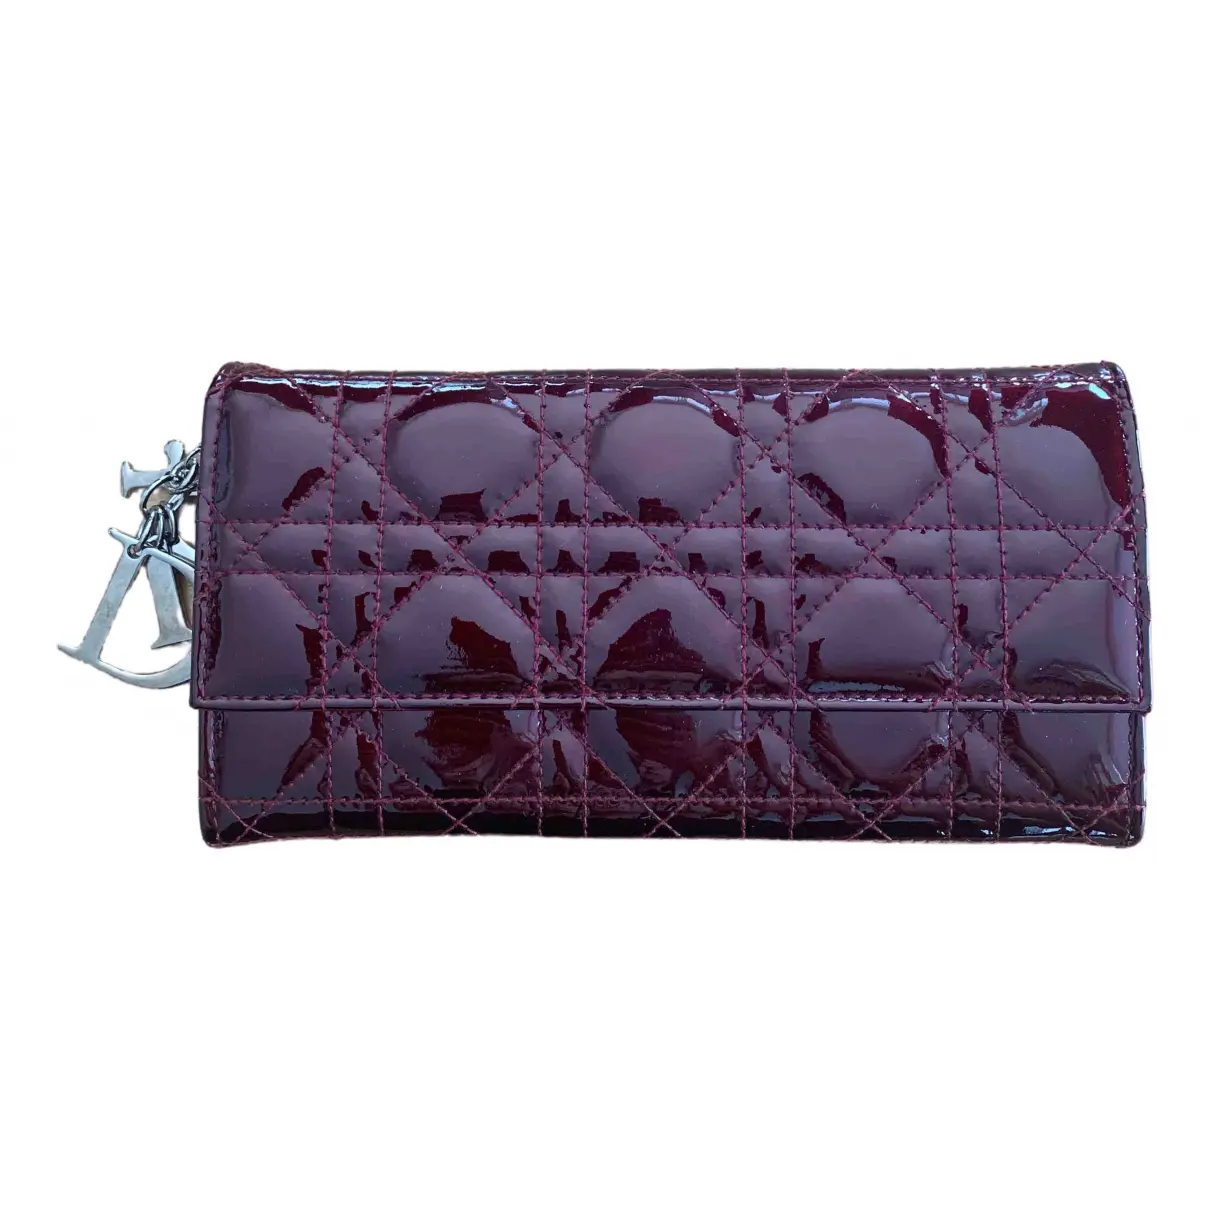 Lady Dior patent leather wallet Dior